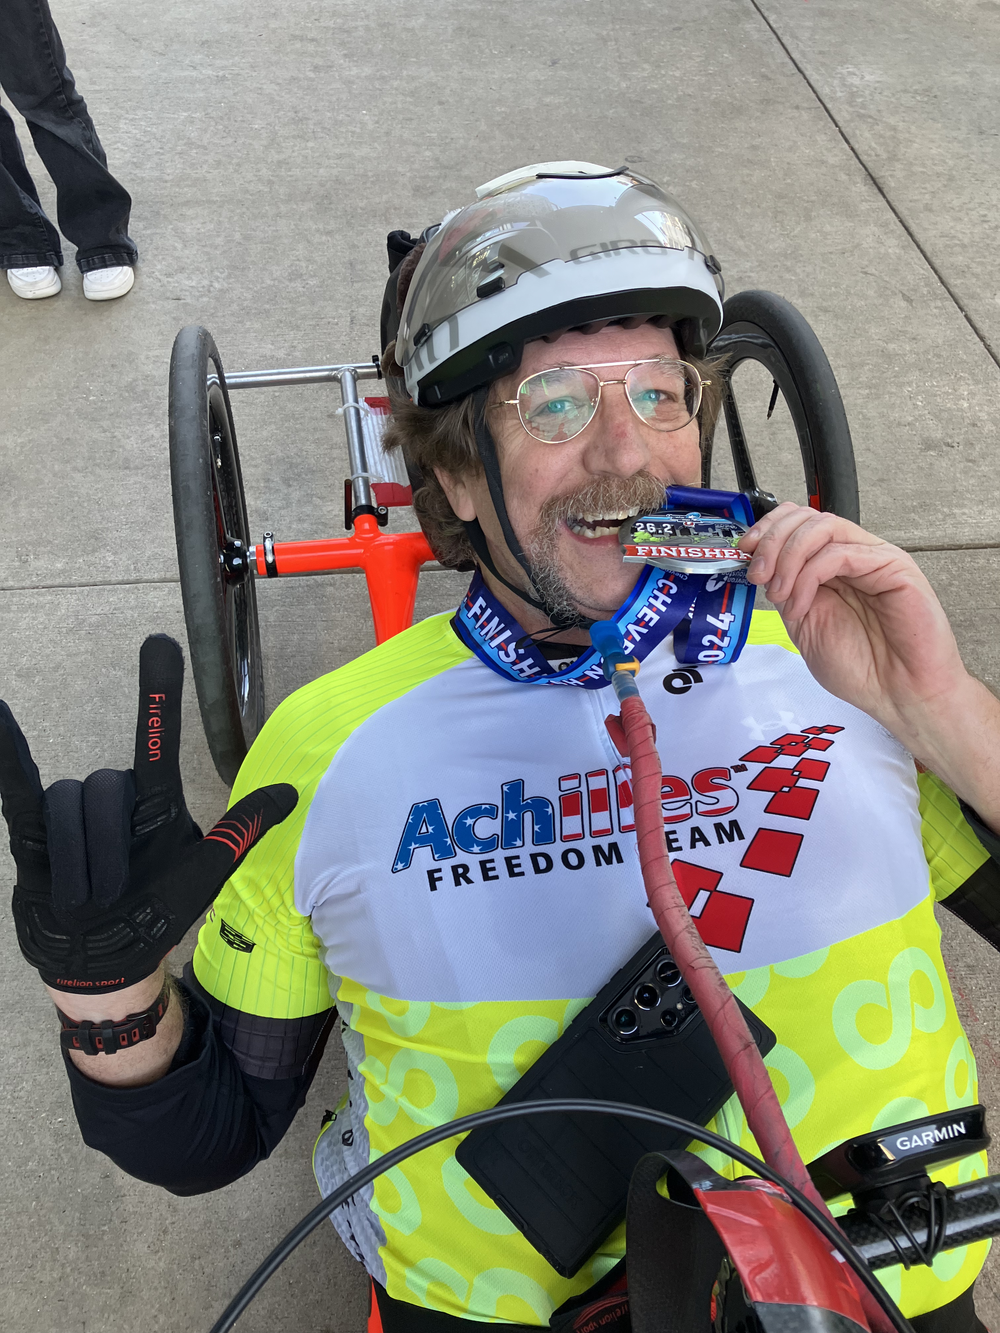  Achilles Freedom Team member posing and biting on his race medal  